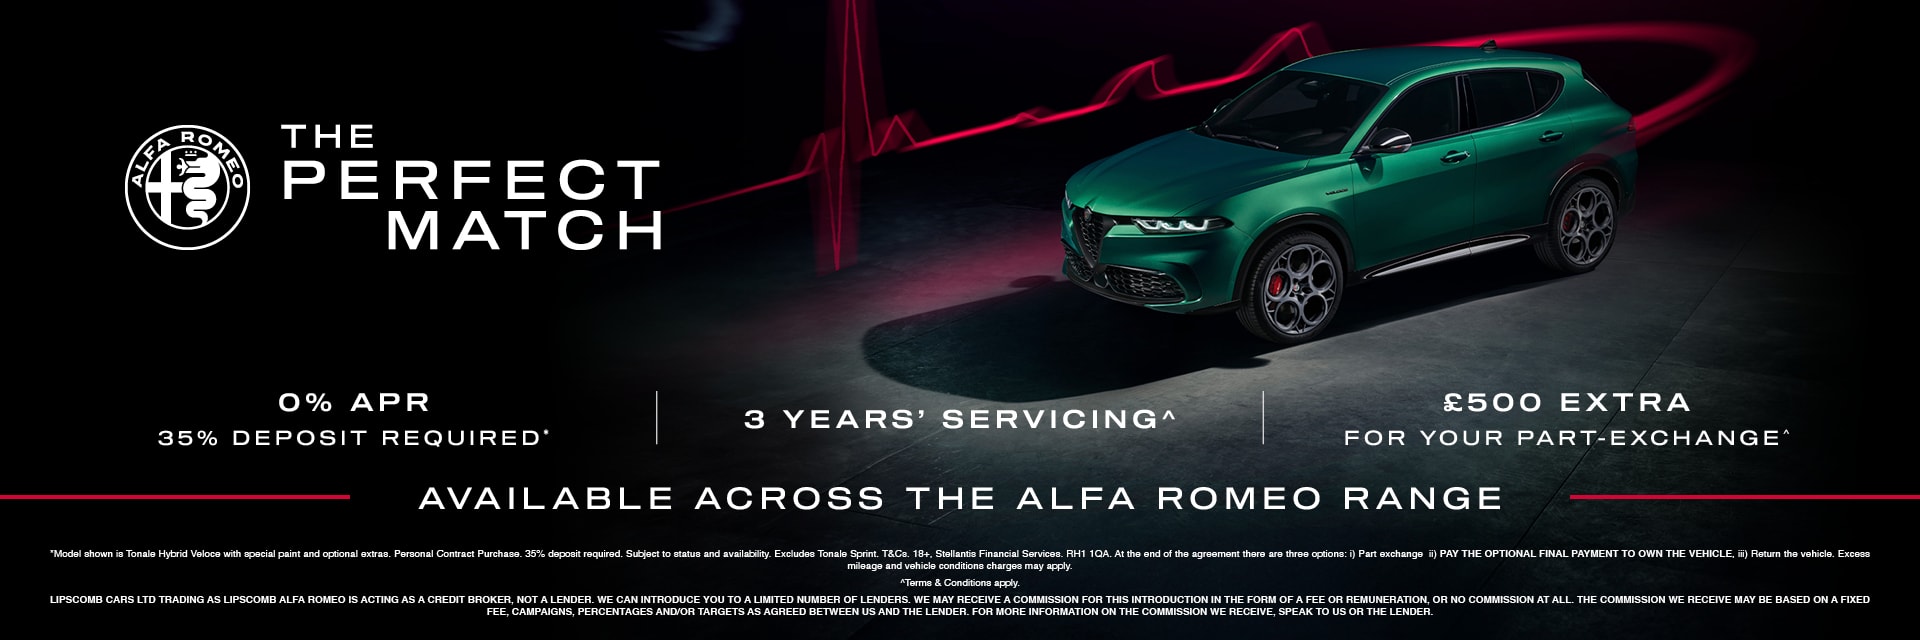 Alfa Romeo Range Now Available with 0% APR